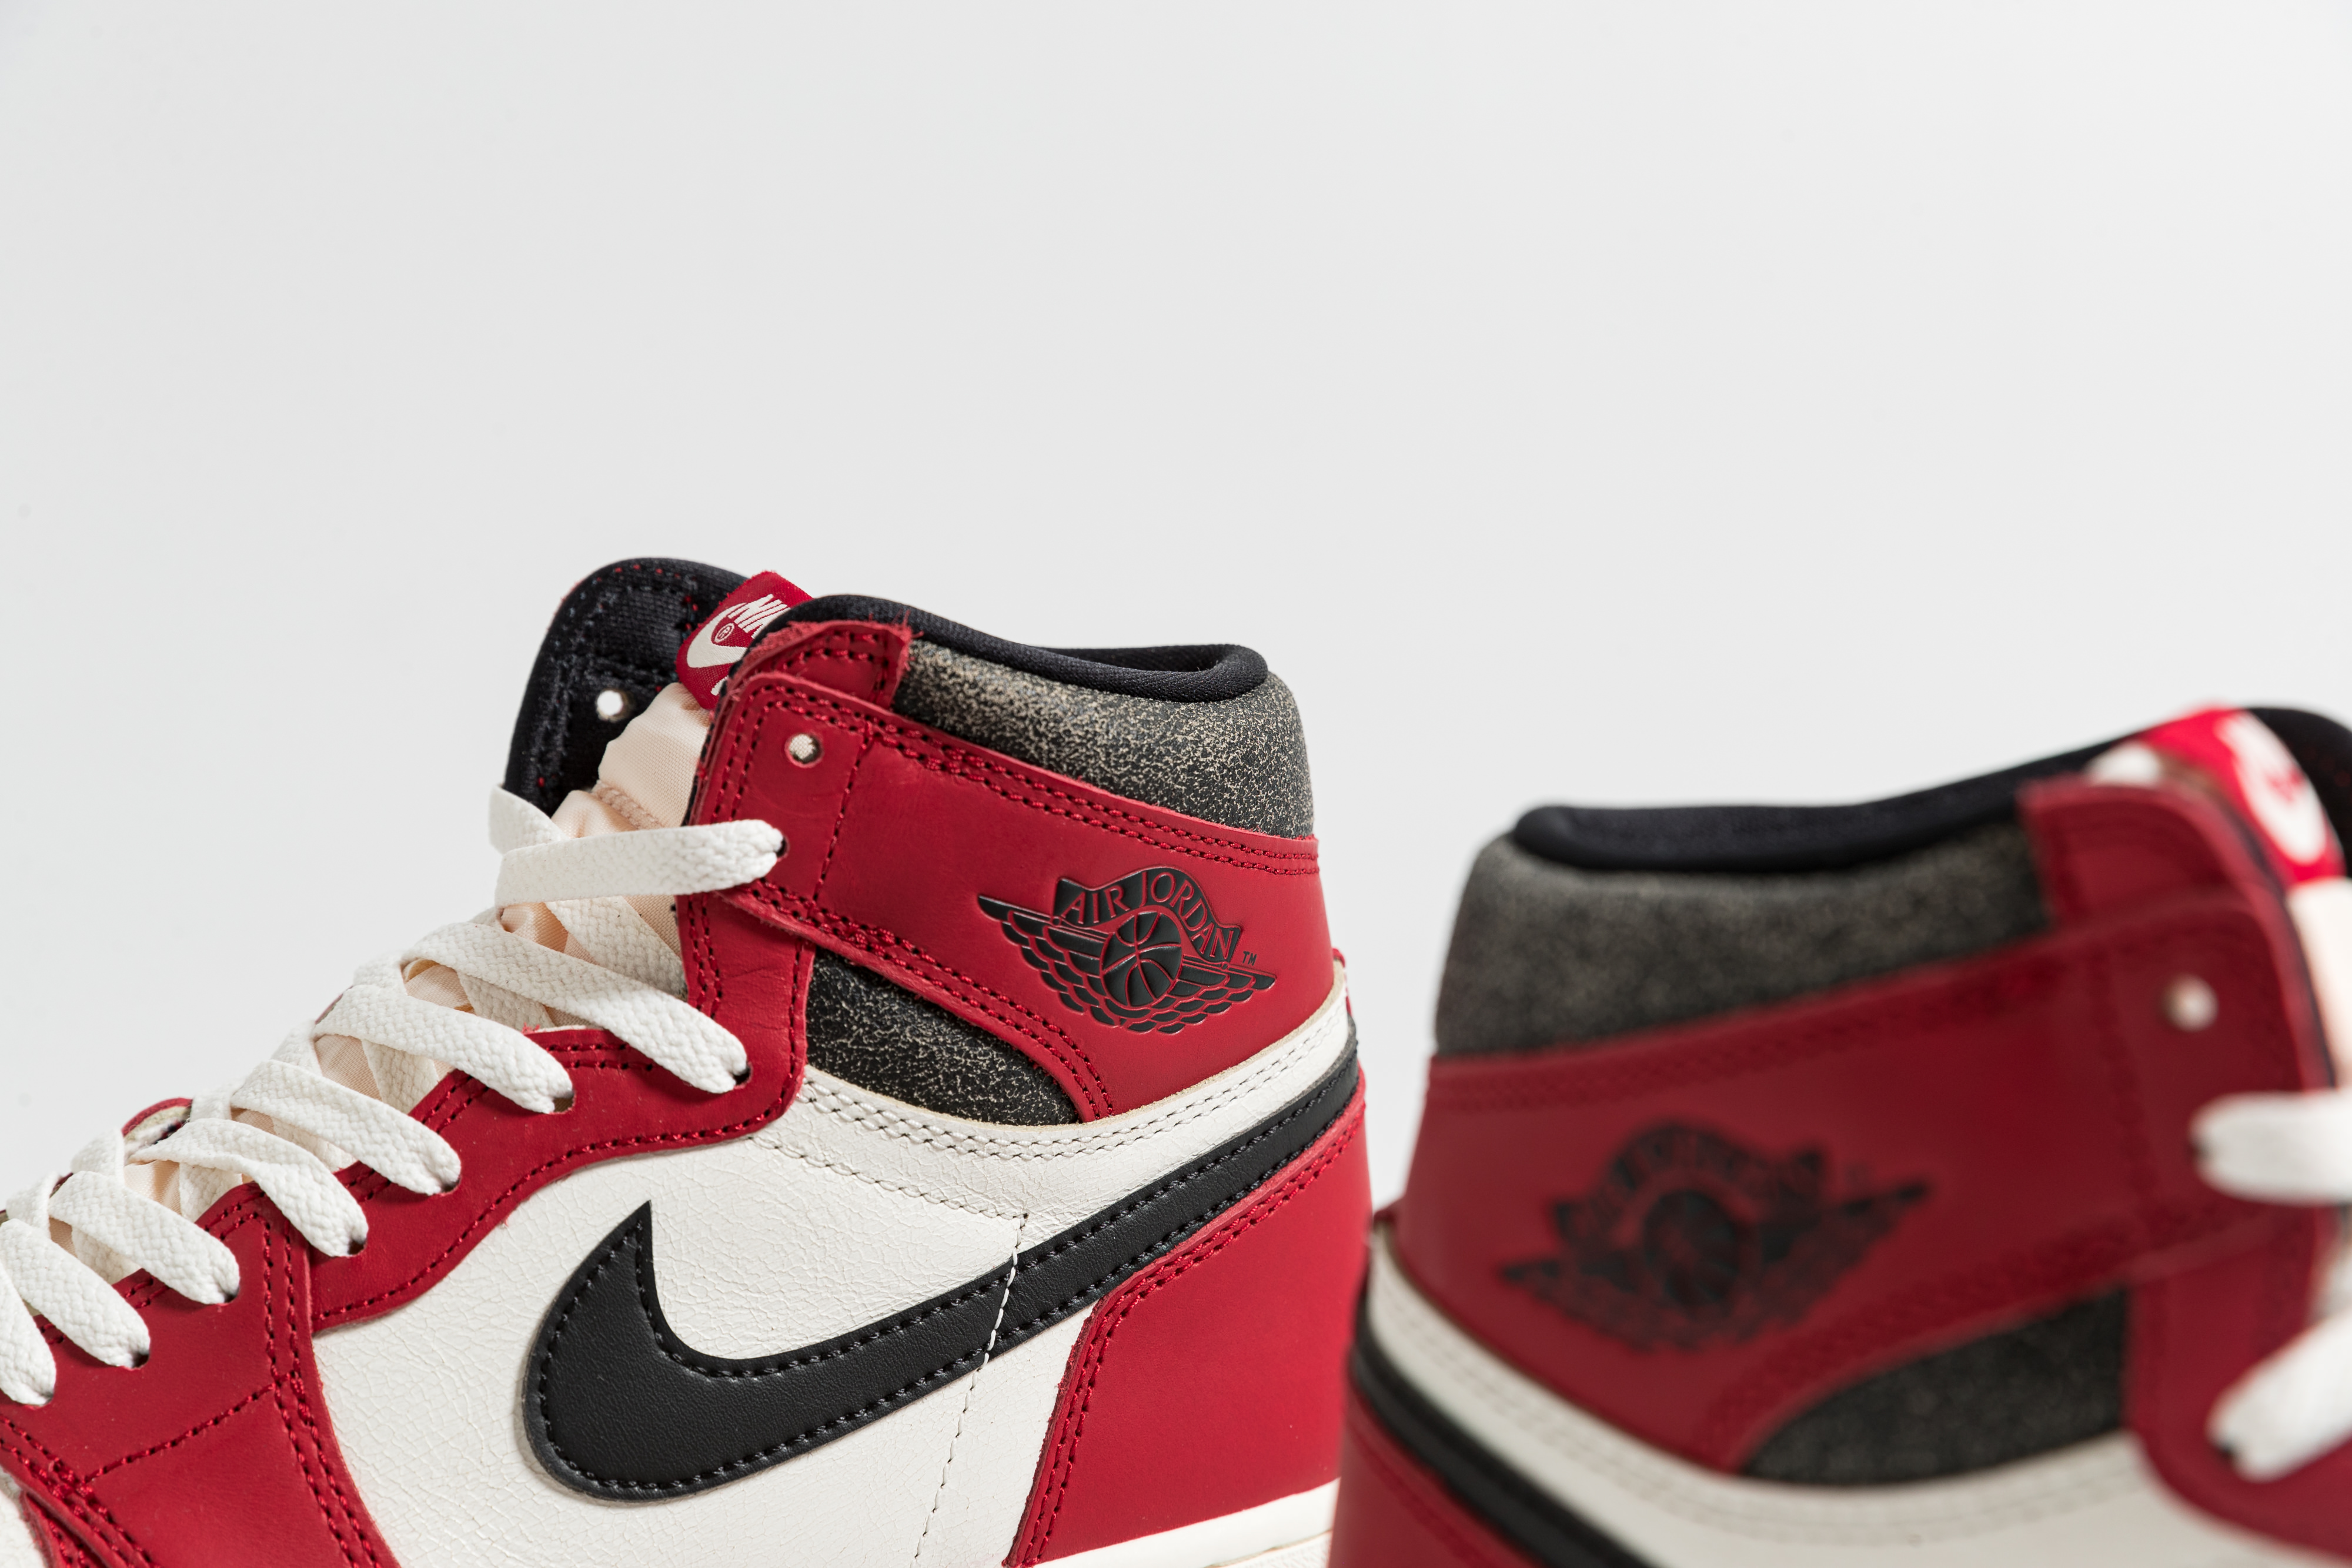 Up There Launches - Nike Air Jordan 1 Retro 'Lost & Found'